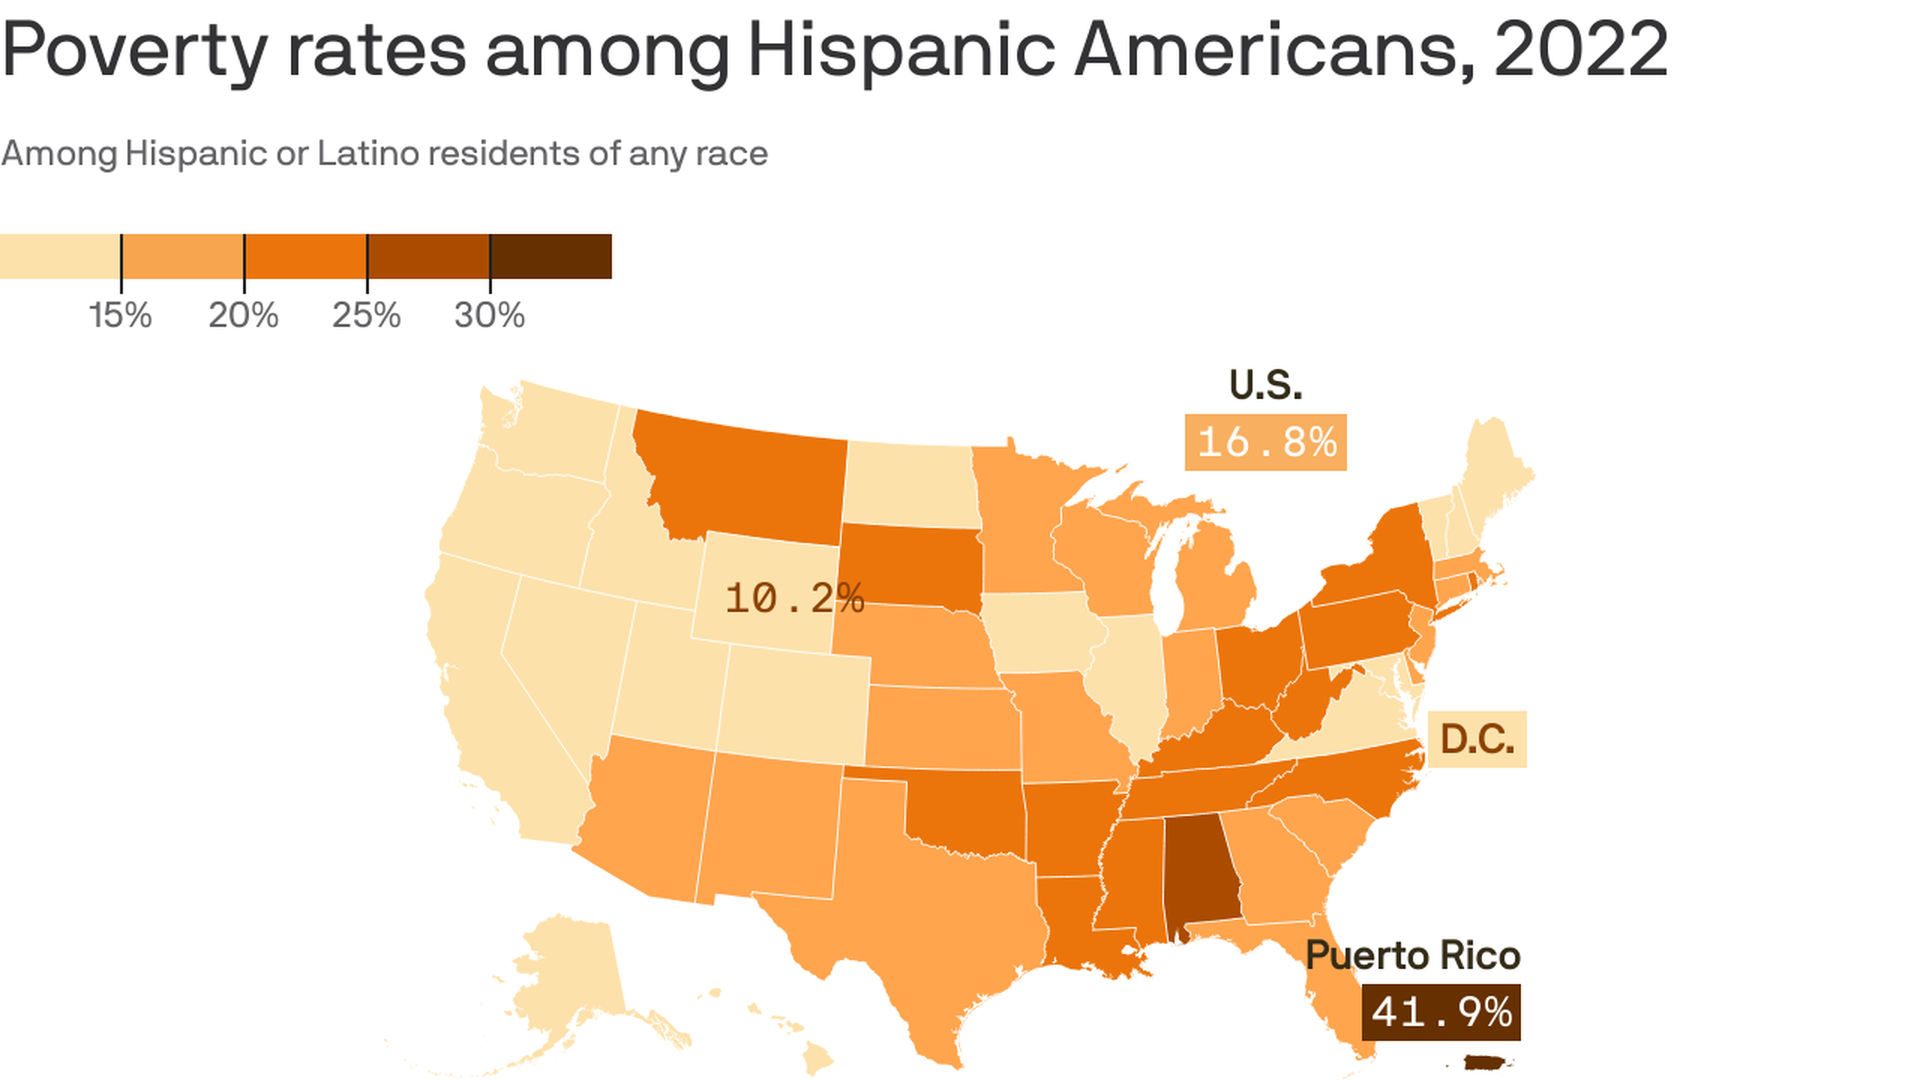 Rate of U.S. Latino poverty by state with Puerto Rico, a commonwealth, having a rate of 41.9%.